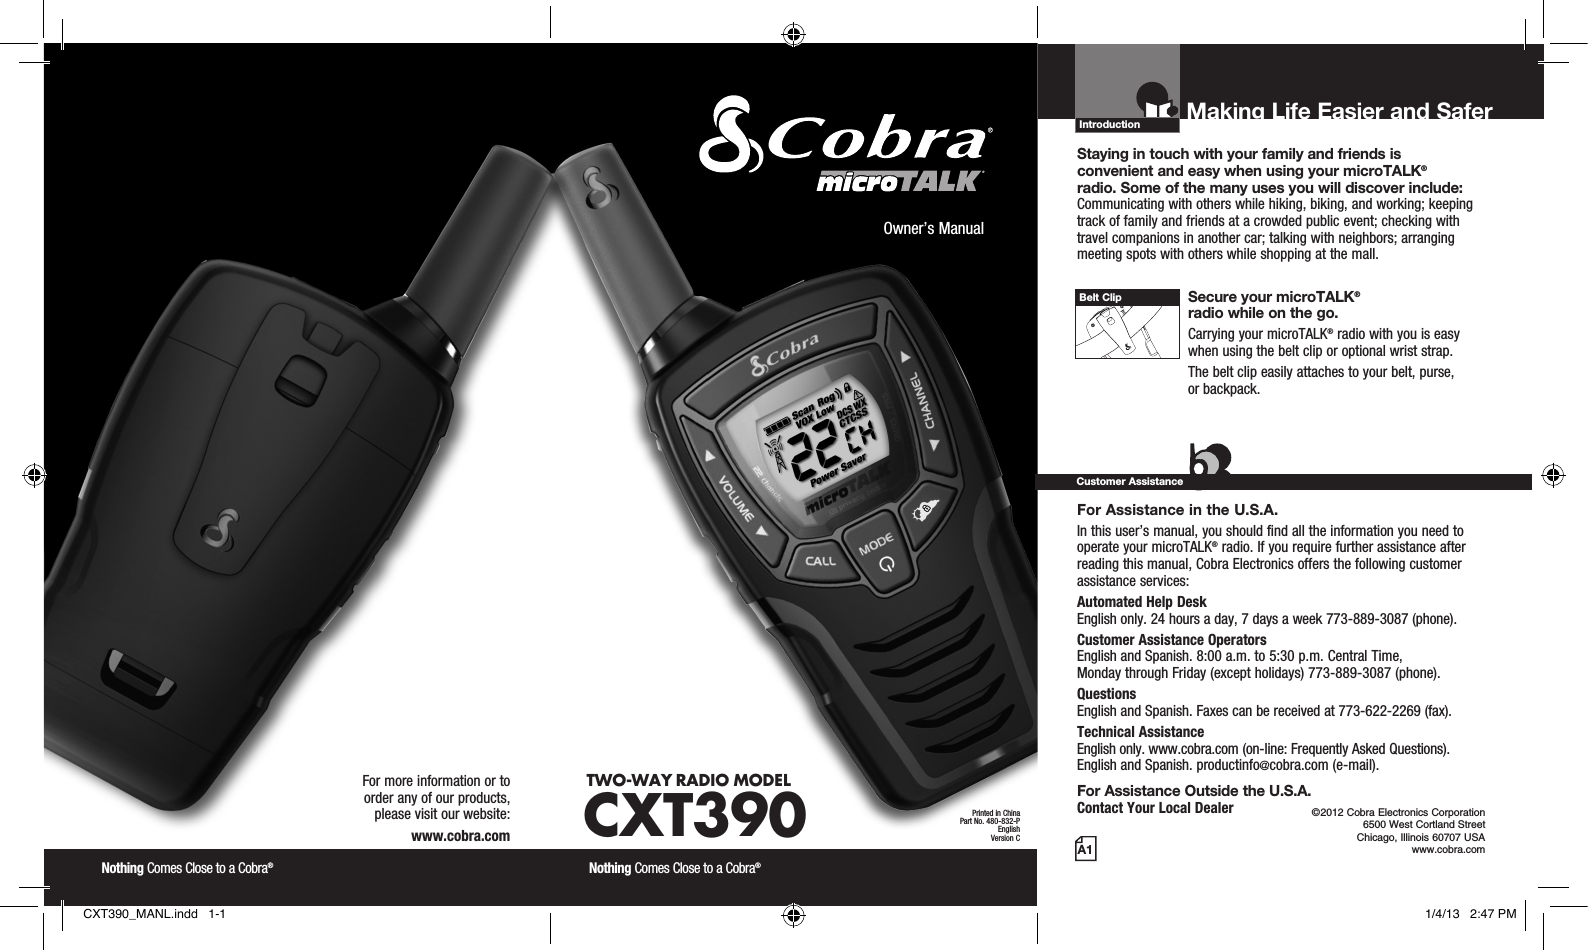 Introduction©2012 Cobra Electronics Corporation 6500 West Cortland Street Chicago, Illinois 60707 USAwww.cobra.comMaking Life Easier and Safer Staying in touch with your family and friends is  convenient and easy when using your microTALK®  radio. Some of the many uses you will discover include:Communicating with others while hiking, biking, and working; keeping track of family and friends at a crowded public event; checking with travel companions in another car; talking with neighbors; arranging meeting spots with others while shopping at the mall. Secure your microTALK®  radio while on the go.Carrying your microTALK® radio with you is easy when using the belt clip or optional wrist strap. The belt clip easily attaches to your belt, purse,  or backpack.For Assistance in the U.S.A. In this user’s manual, you should find all the information you need to operate your microTALK® radio. If you require further assistance after reading this manual, Cobra Electronics offers the following customer assistance services:Automated Help Desk  English only. 24 hours a day, 7 days a week 773-889-3087 (phone). Customer Assistance Operators  English and Spanish. 8:00 a.m. to 5:30 p.m. Central Time,  Monday through Friday (except holidays) 773-889-3087 (phone). Questions  English and Spanish. Faxes can be received at 773-622-2269 (fax). Technical Assistance  English only. www.cobra.com (on-line: Frequently Asked Questions).  English and Spanish. productinfo@cobra.com (e-mail).For Assistance Outside the U.S.A. Contact Your Local DealerCustomer AssistanceA1Owner’s ManualNothing Comes Close to a Cobra® Nothing Comes Close to a Cobra® For more information or to  order any of our products,  please visit our website:www.cobra.comBelt ClipPrinted in ChinaPart No. 480-832-PEnglishVersion CTWO-WAY RADIO  MODEL CXT390CXT390_MANL.indd   1-1 1/4/13   2:47 PM